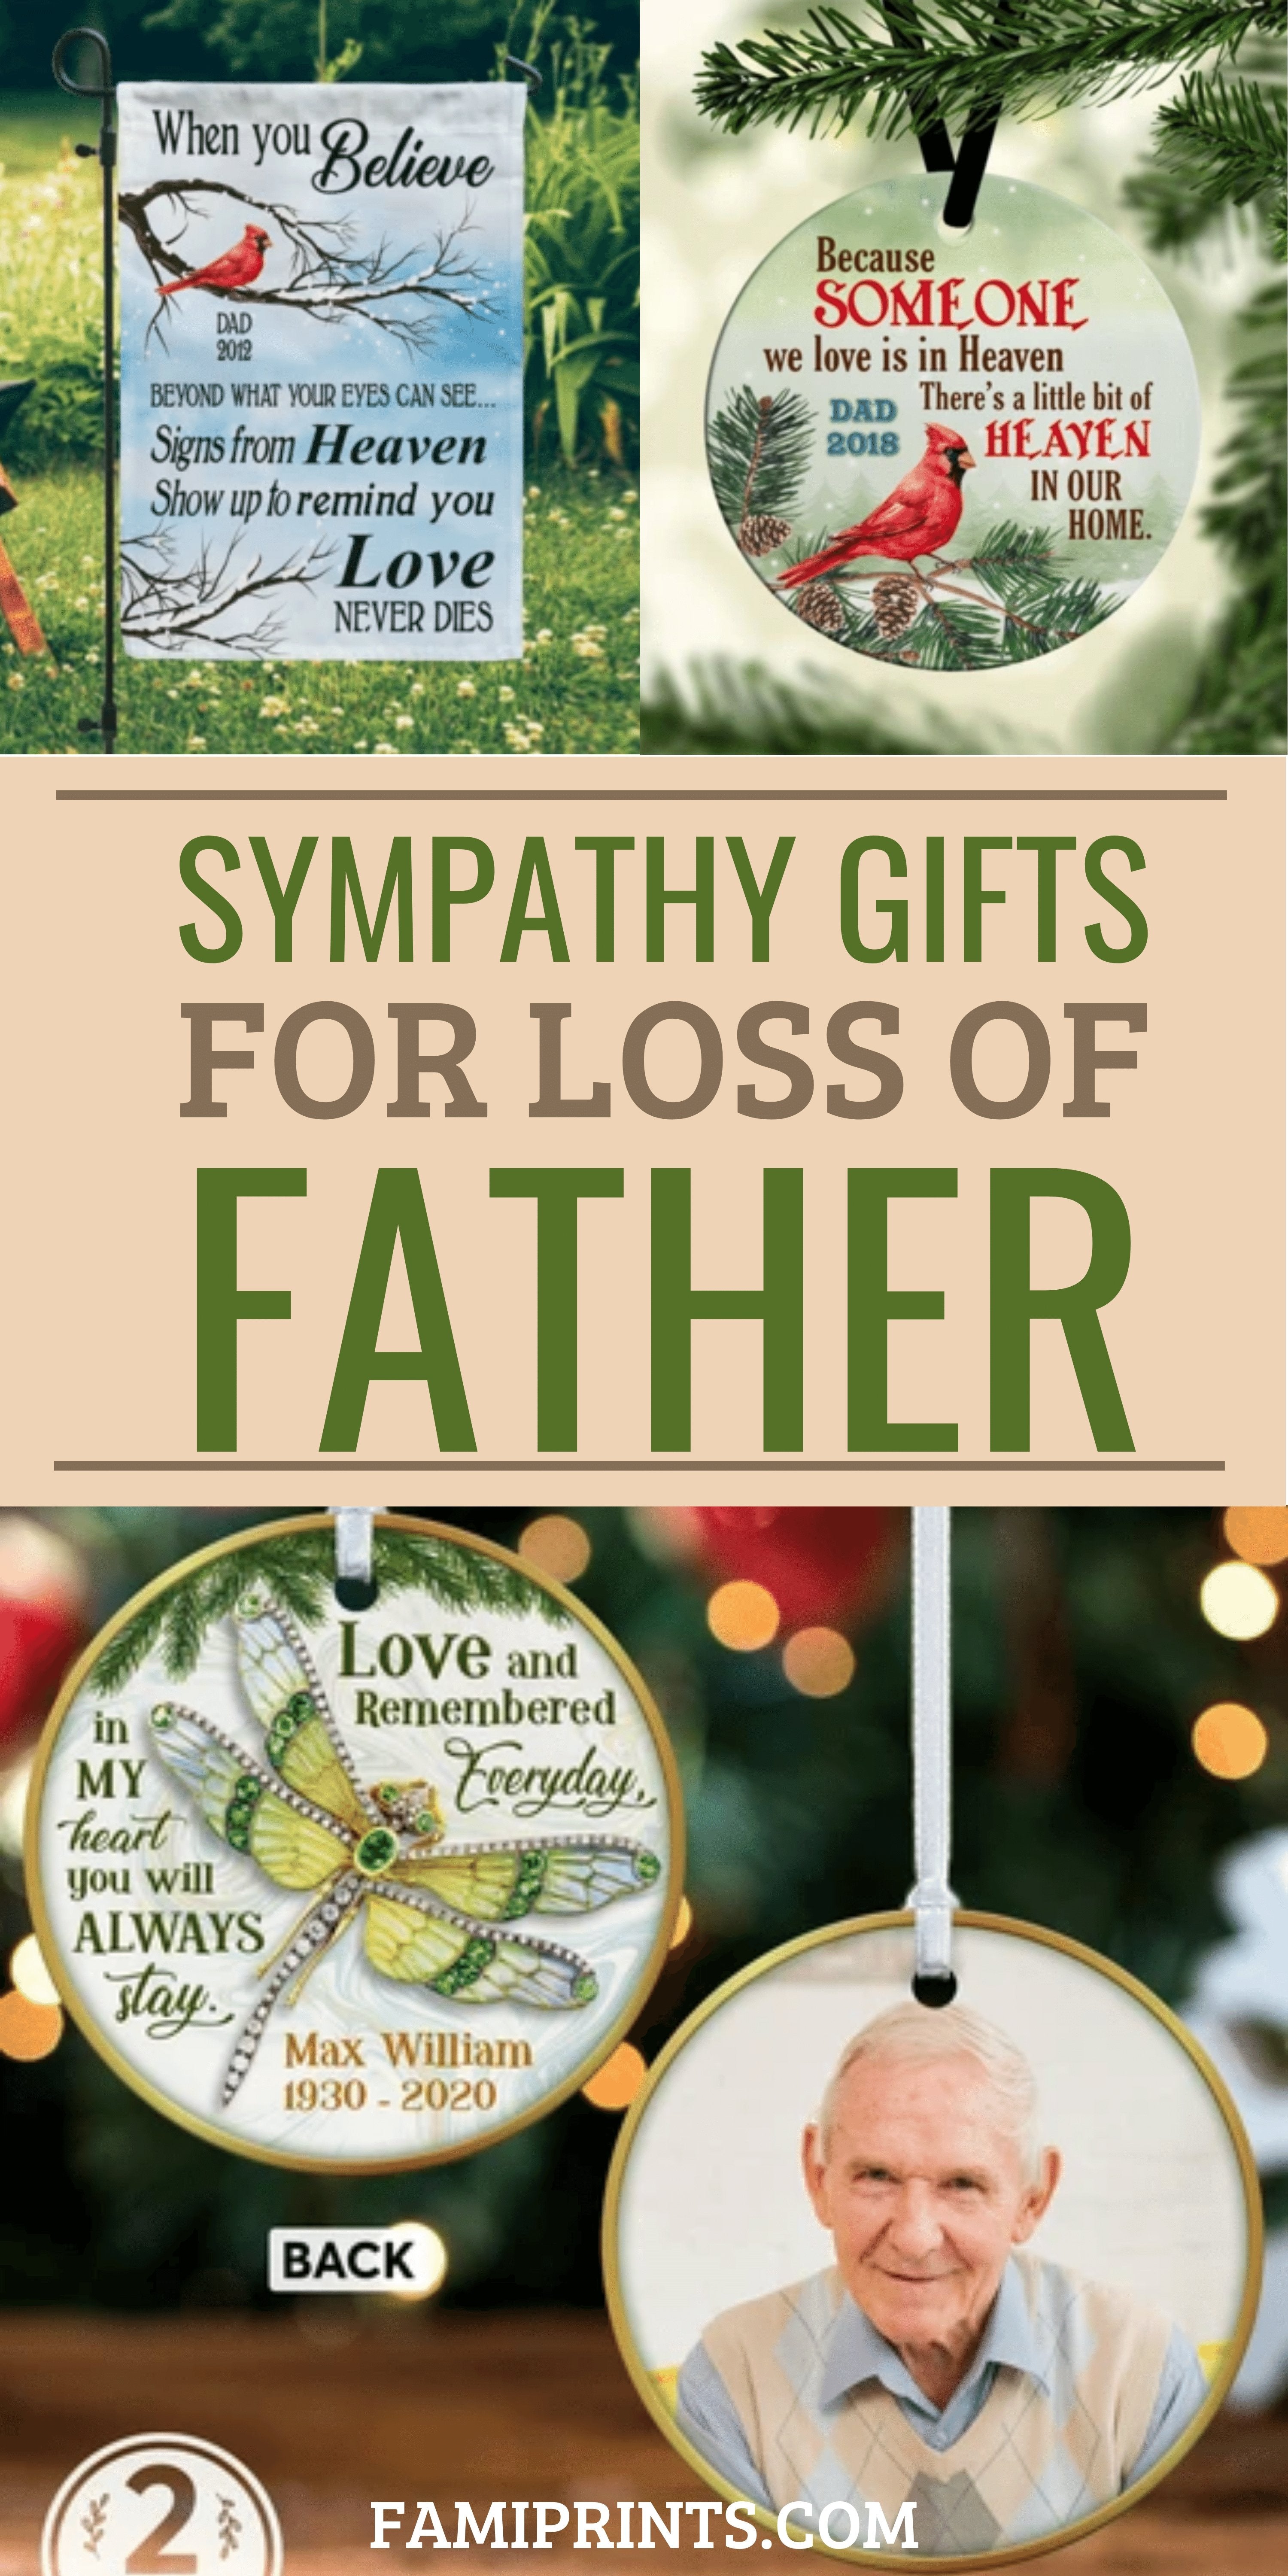 Sympathy Gifts For Loss Of Father | FamiPrints | Trending Personalized Family Gifts